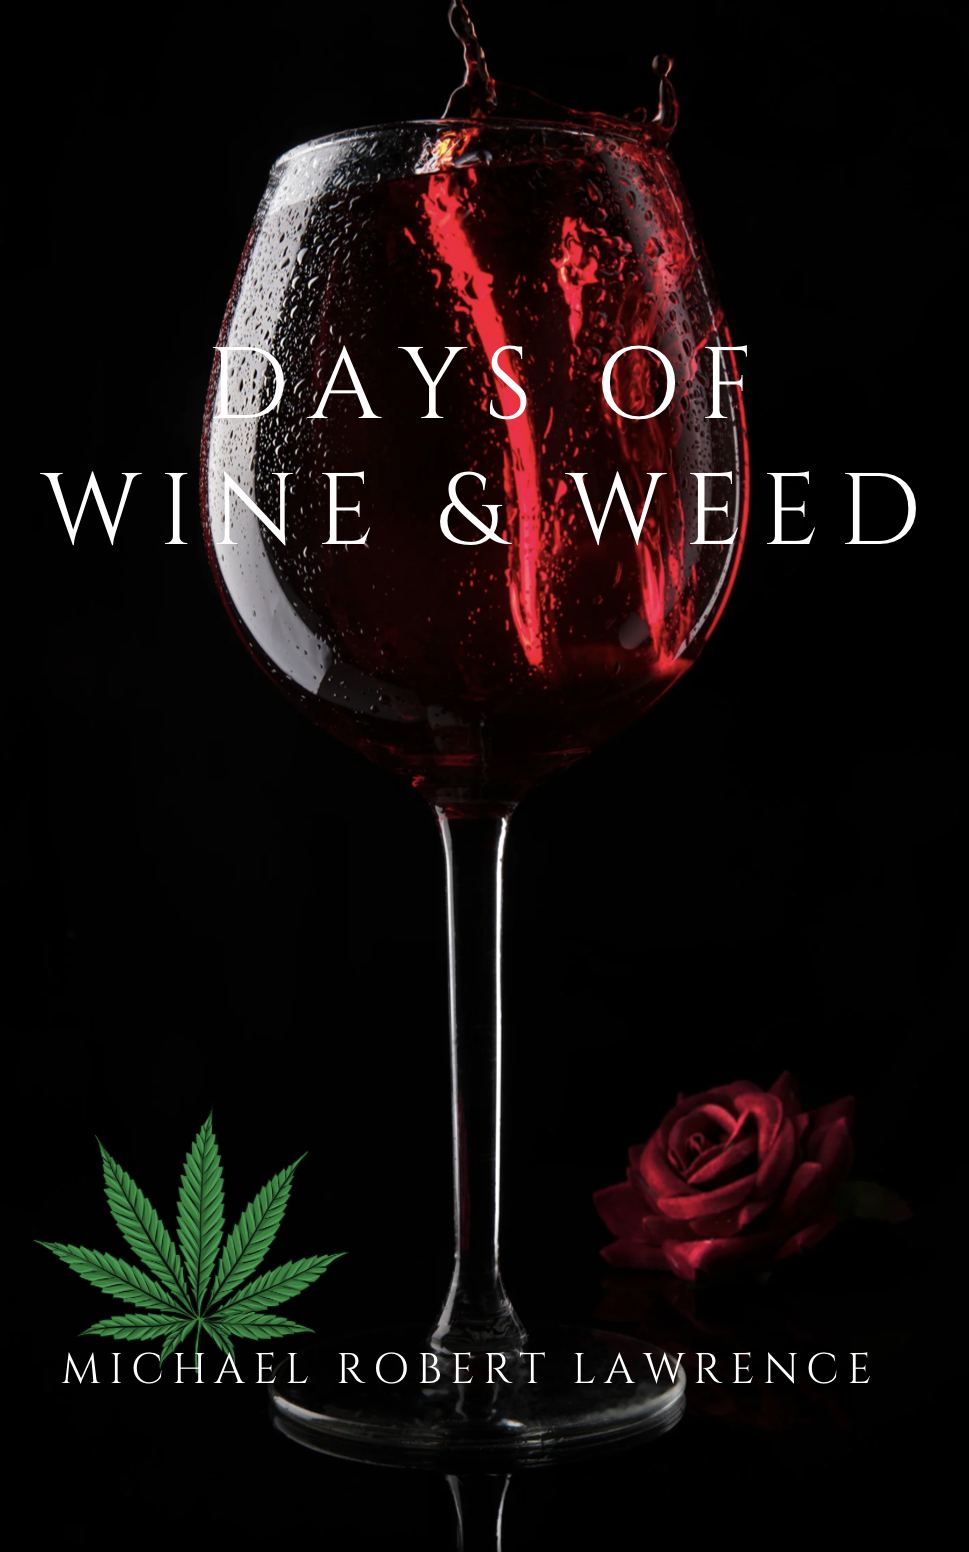 Michael Robert Lawrence Days of Wine & Weed Book